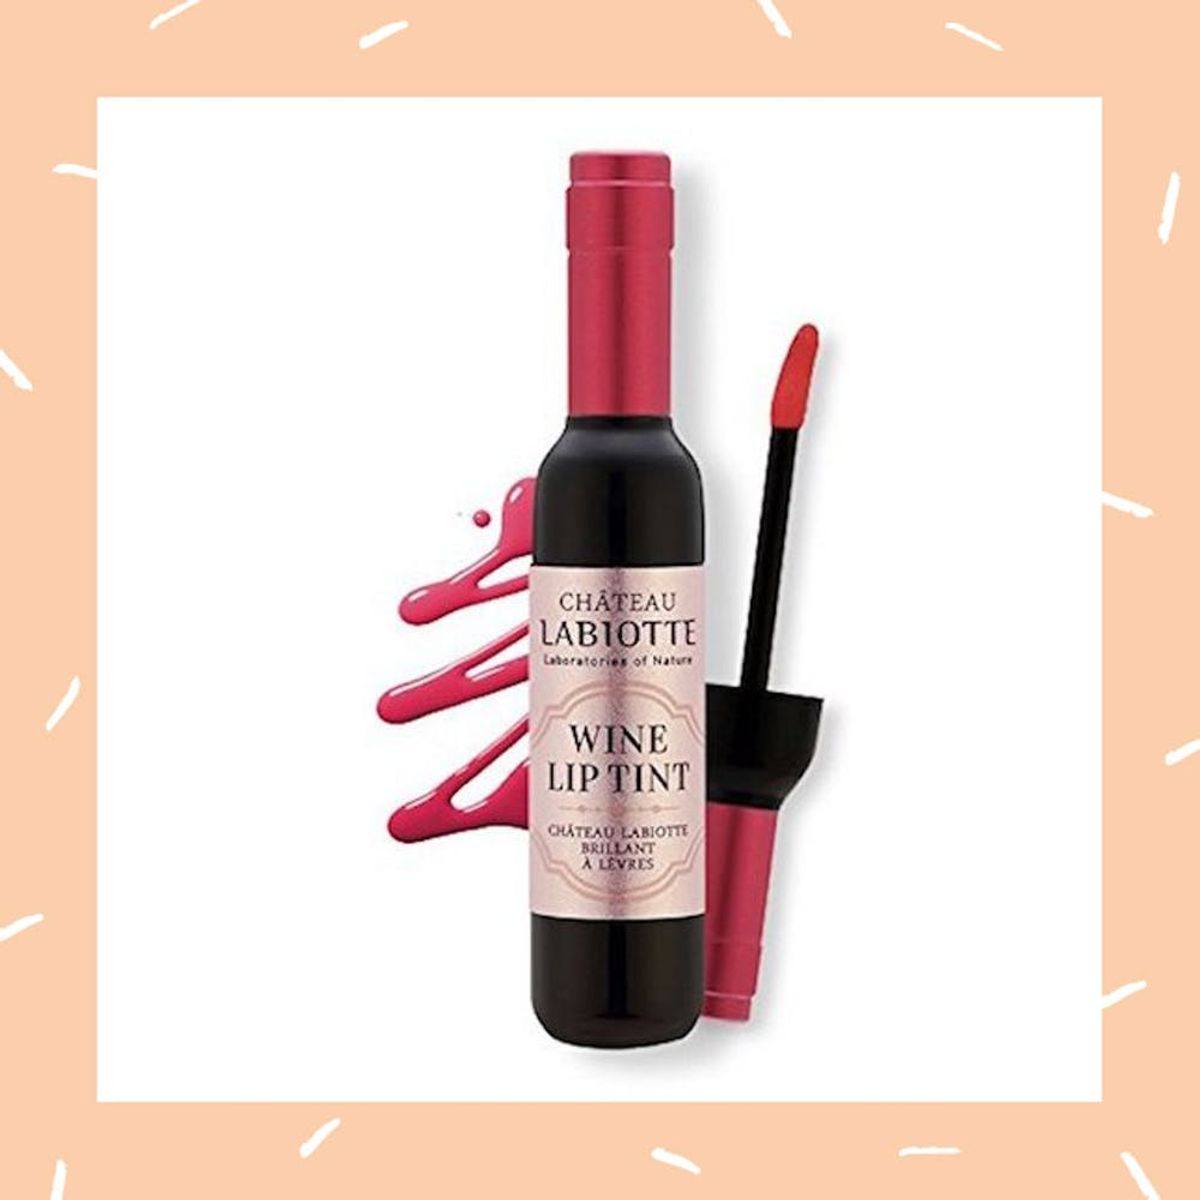 The Latest Trend in Beauty Is…Red Wine? 